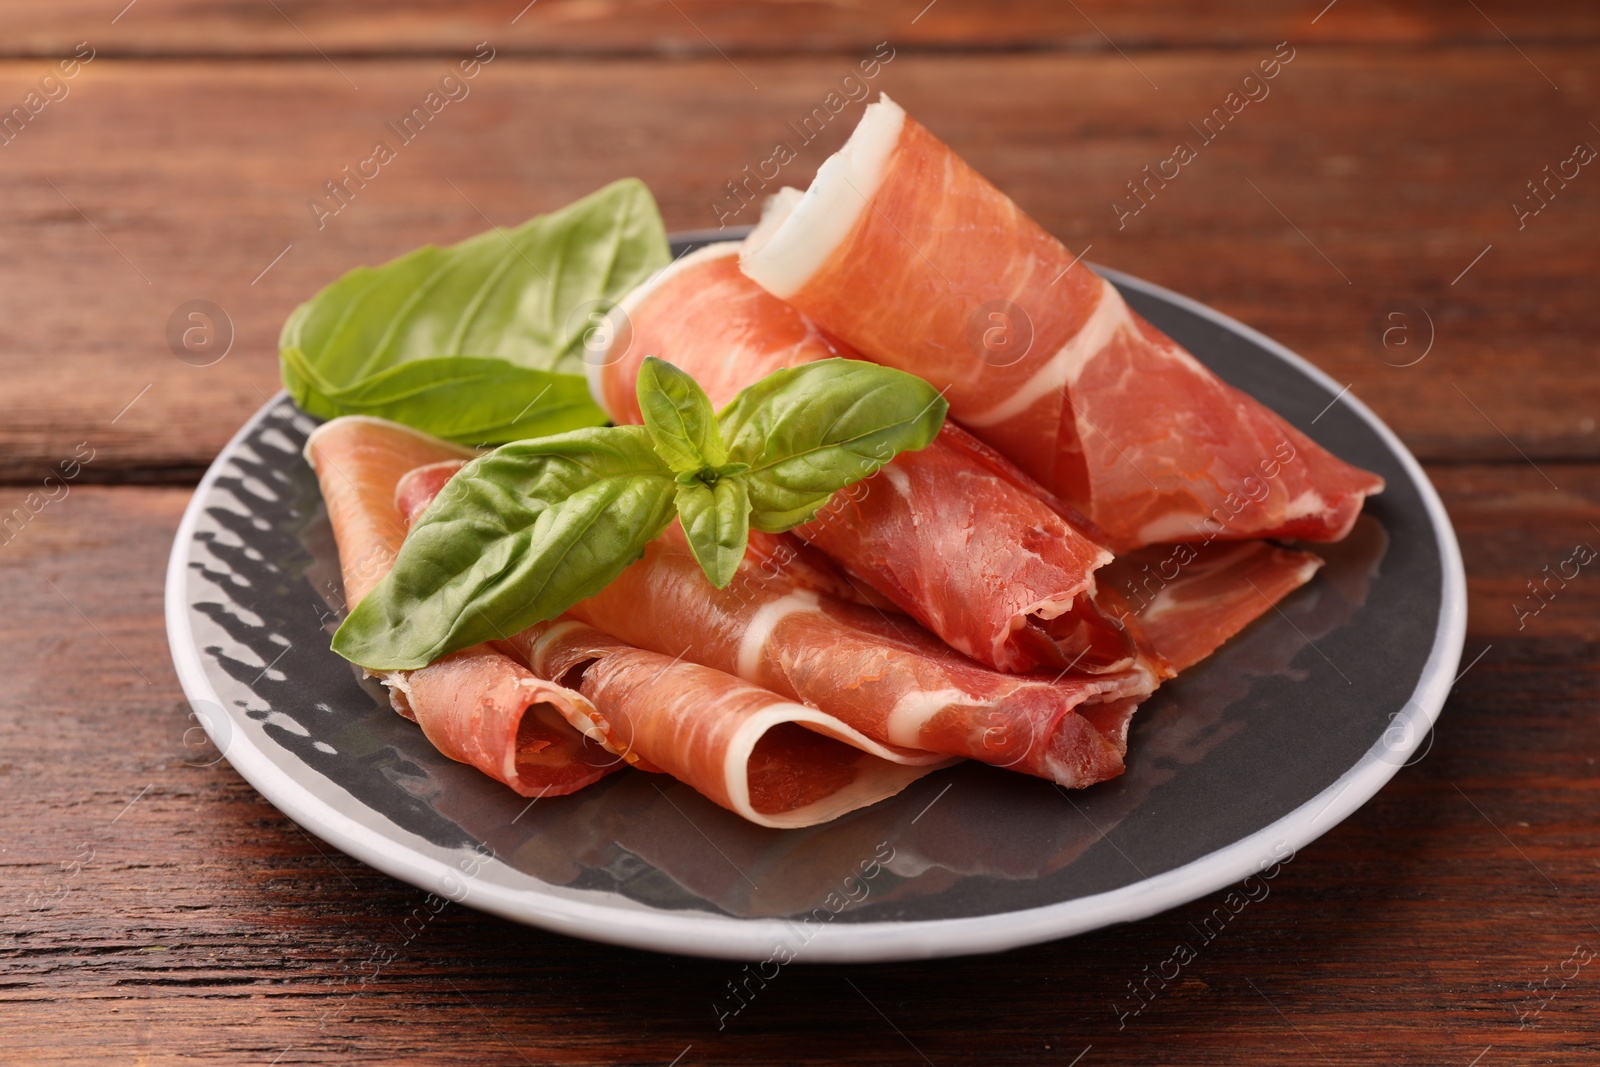 Photo of Plate with rolled slices of delicious jamon and basil on wooden table, closeup